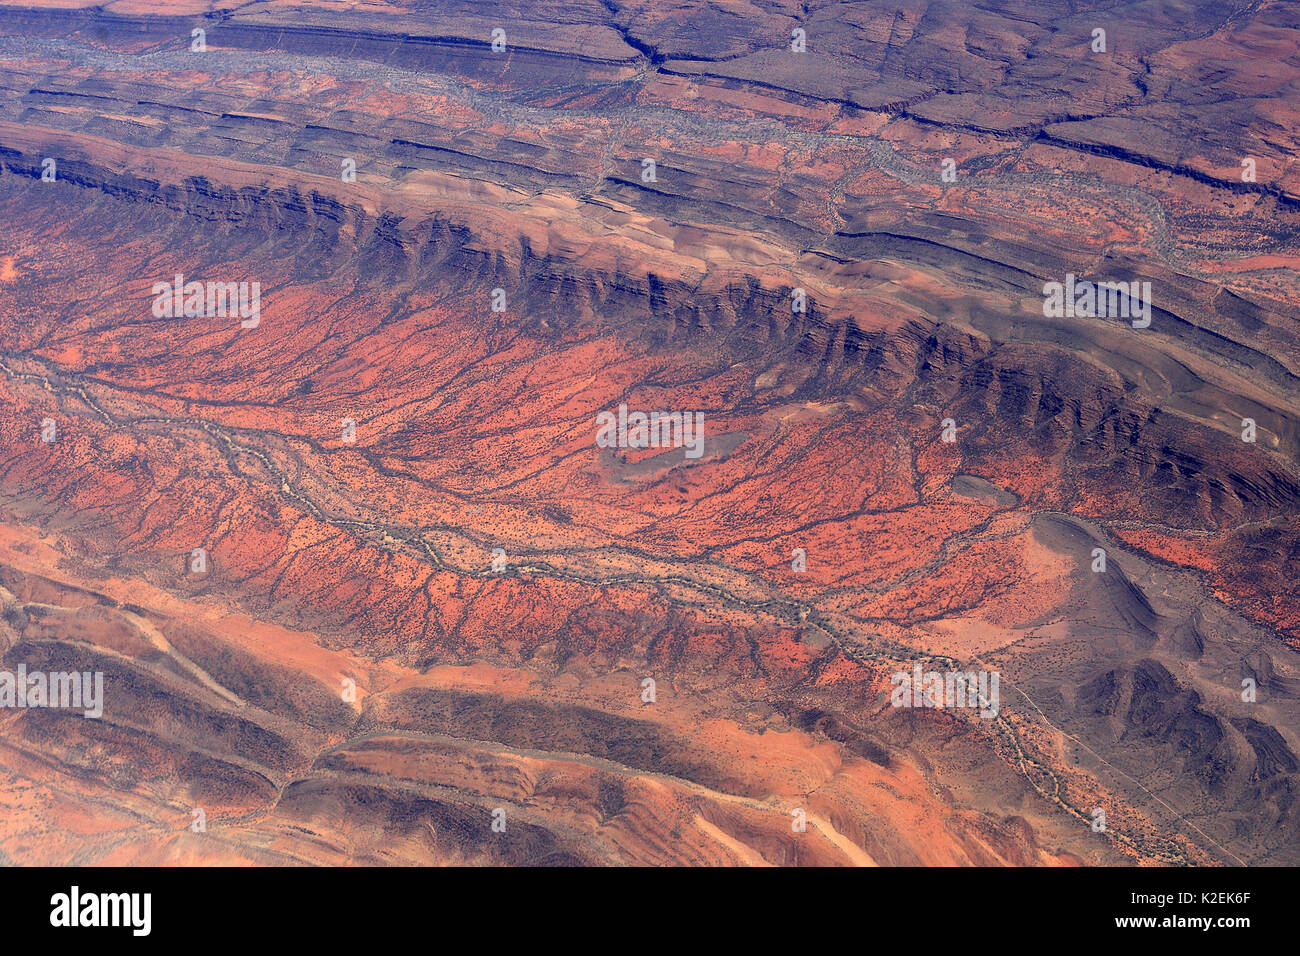 Aerial view of the Red Centre in Australia with dry river bed, Australia, October 2009. Stock Photo